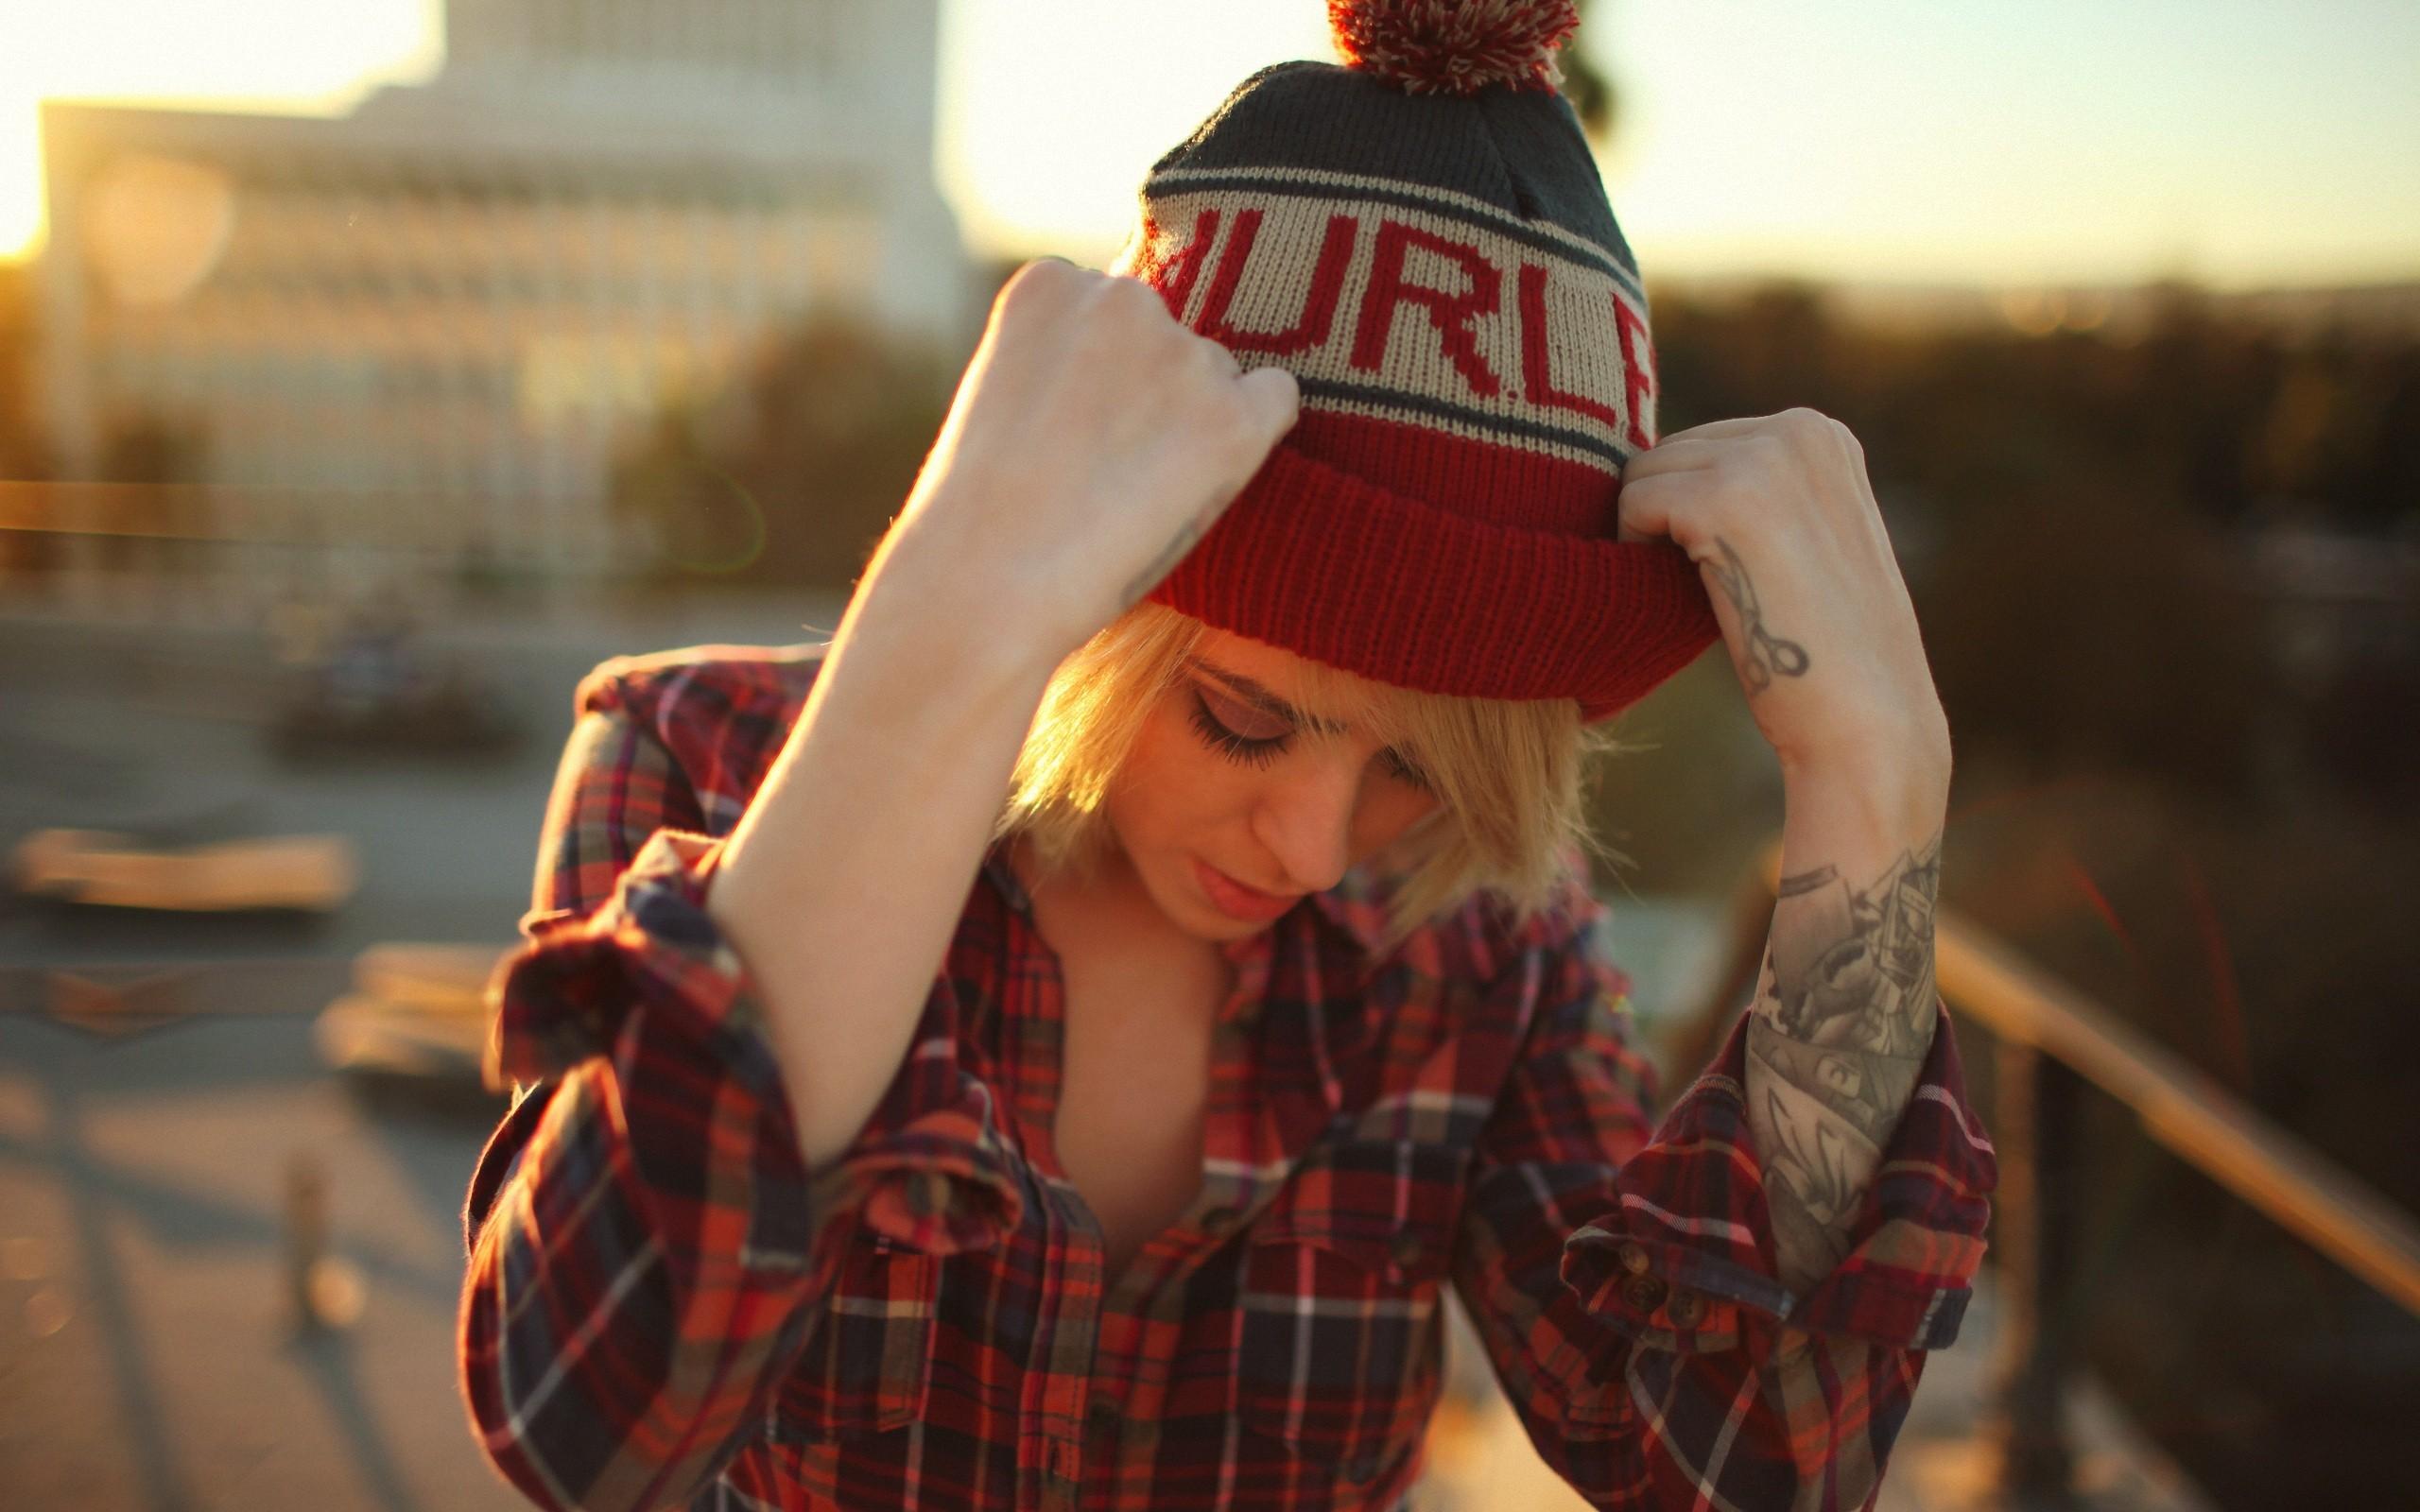 Awesome Girl Hat Wallpaper 43331 2560x1600px